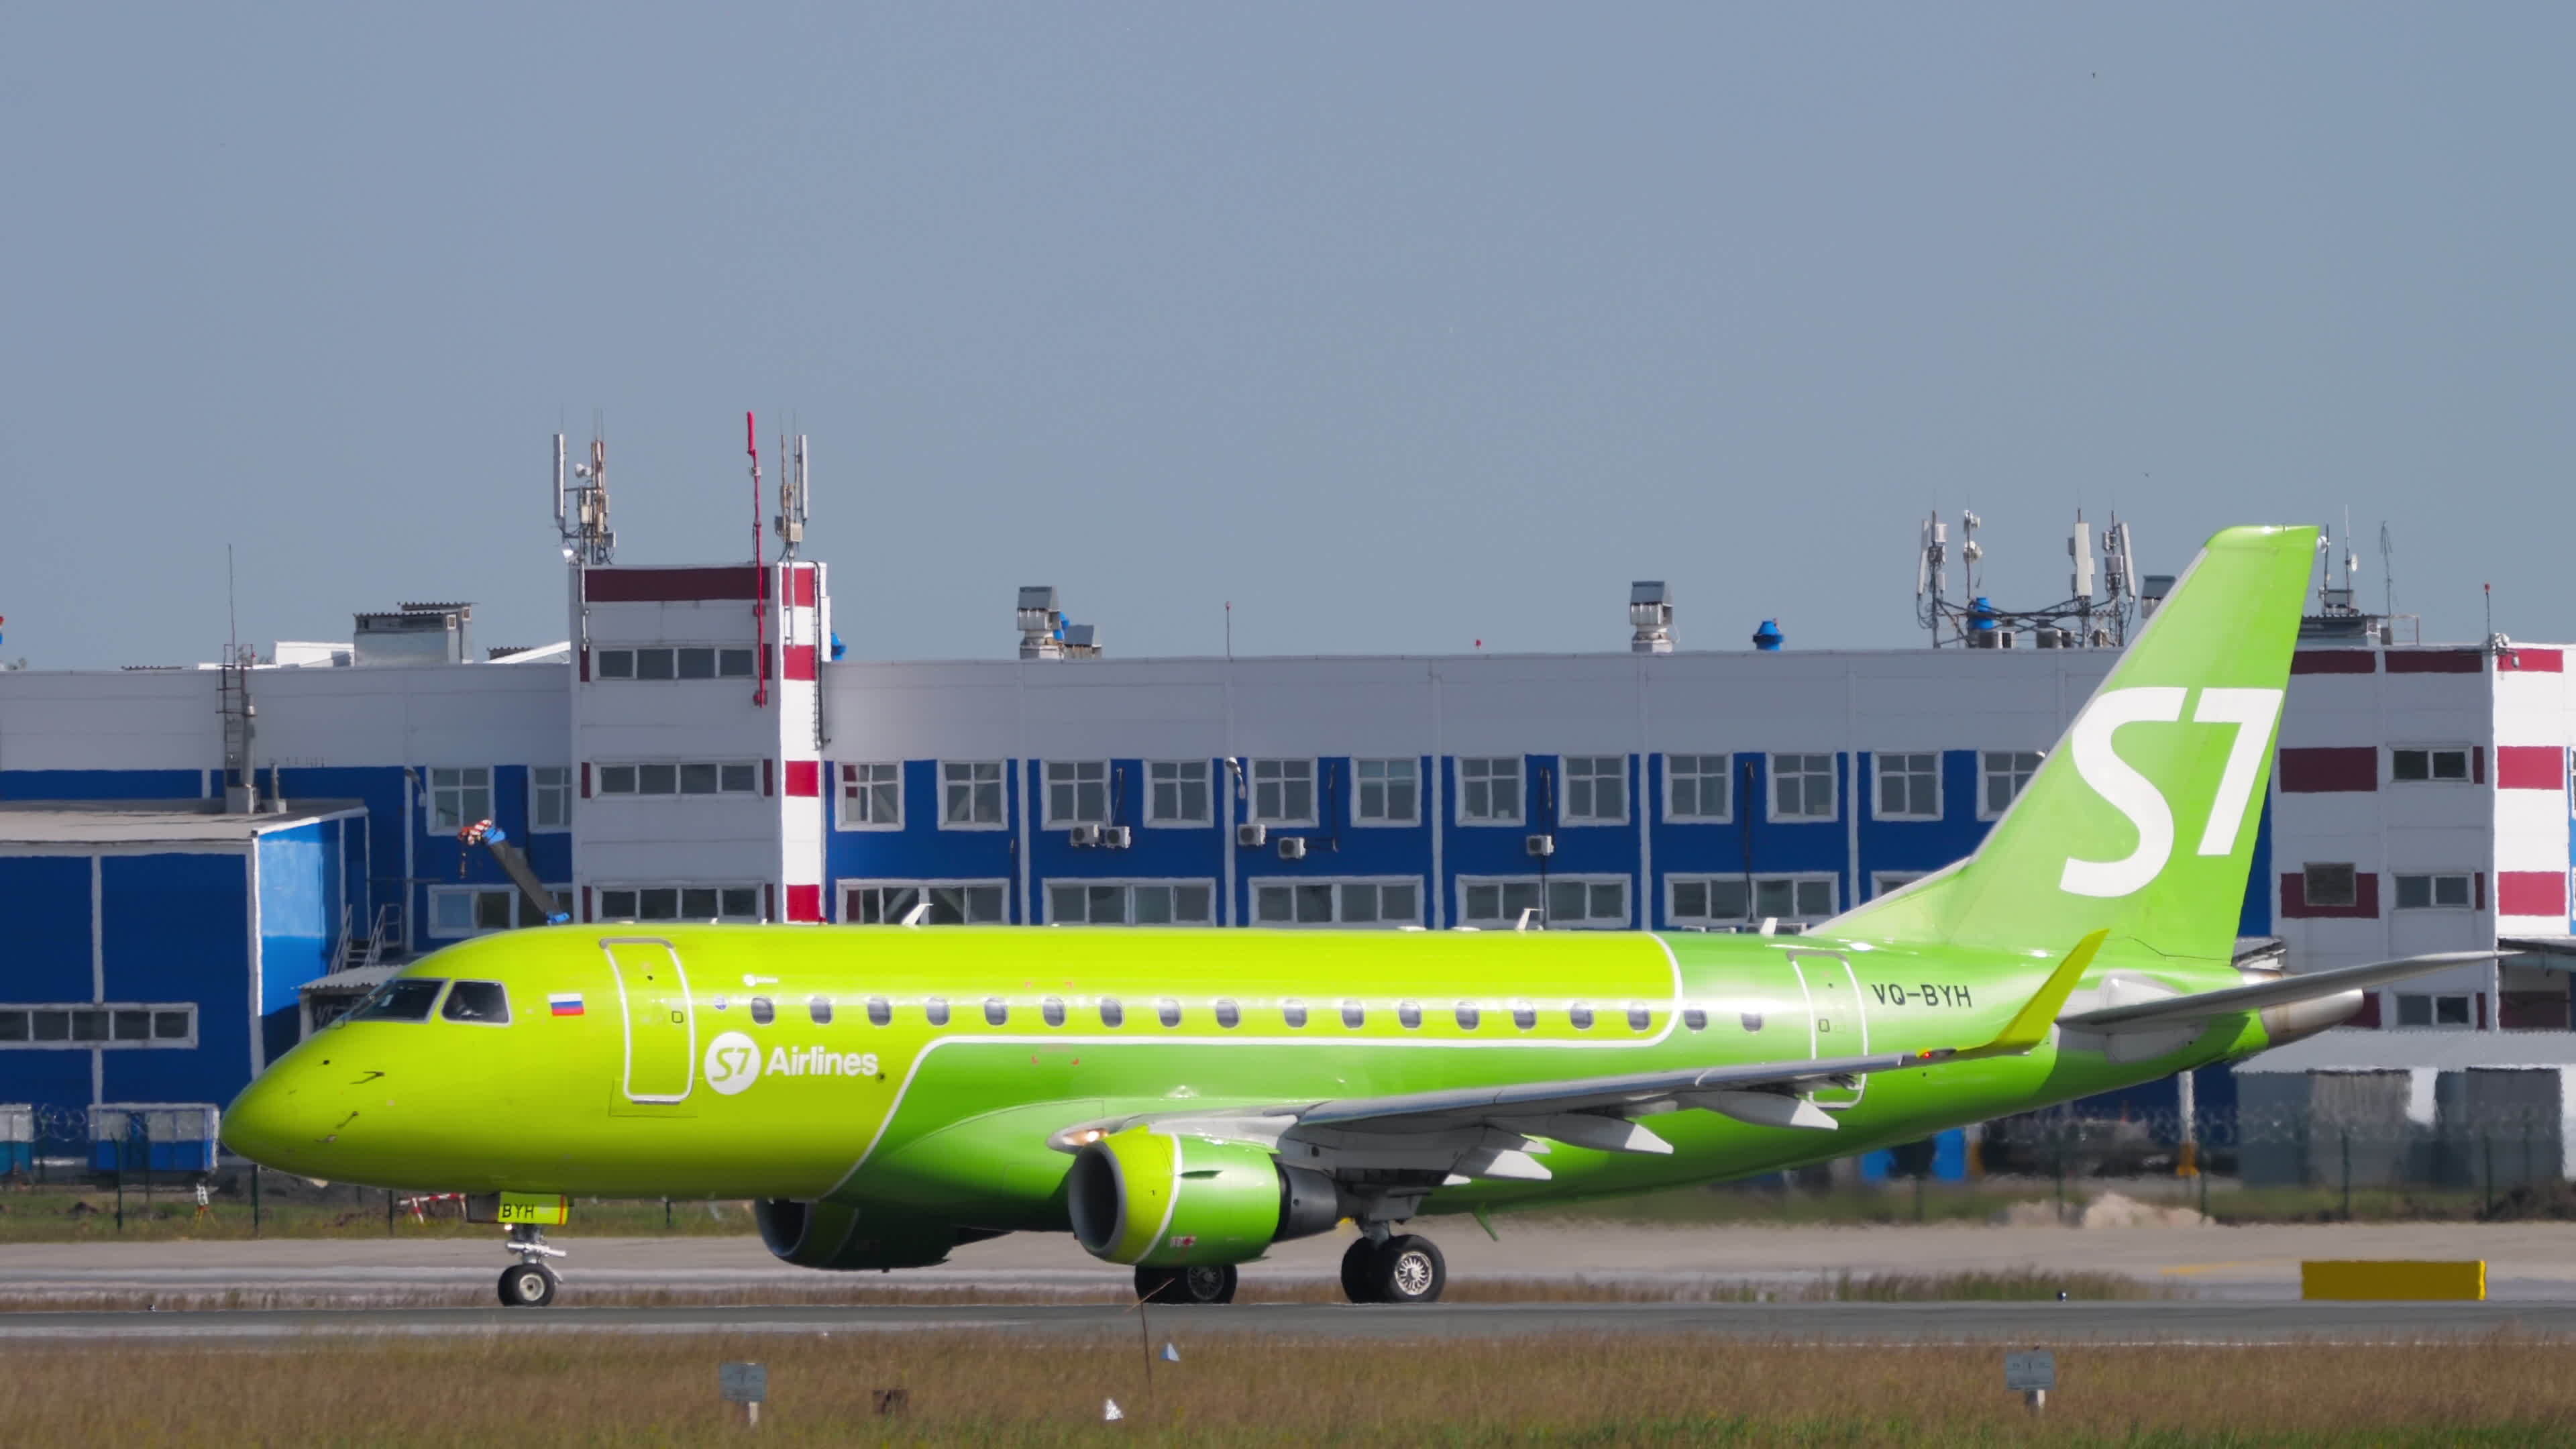 Embraer 170, S7 Airlines, Taxiing on runway, Travel stock footage, 3840x2160 4K Desktop